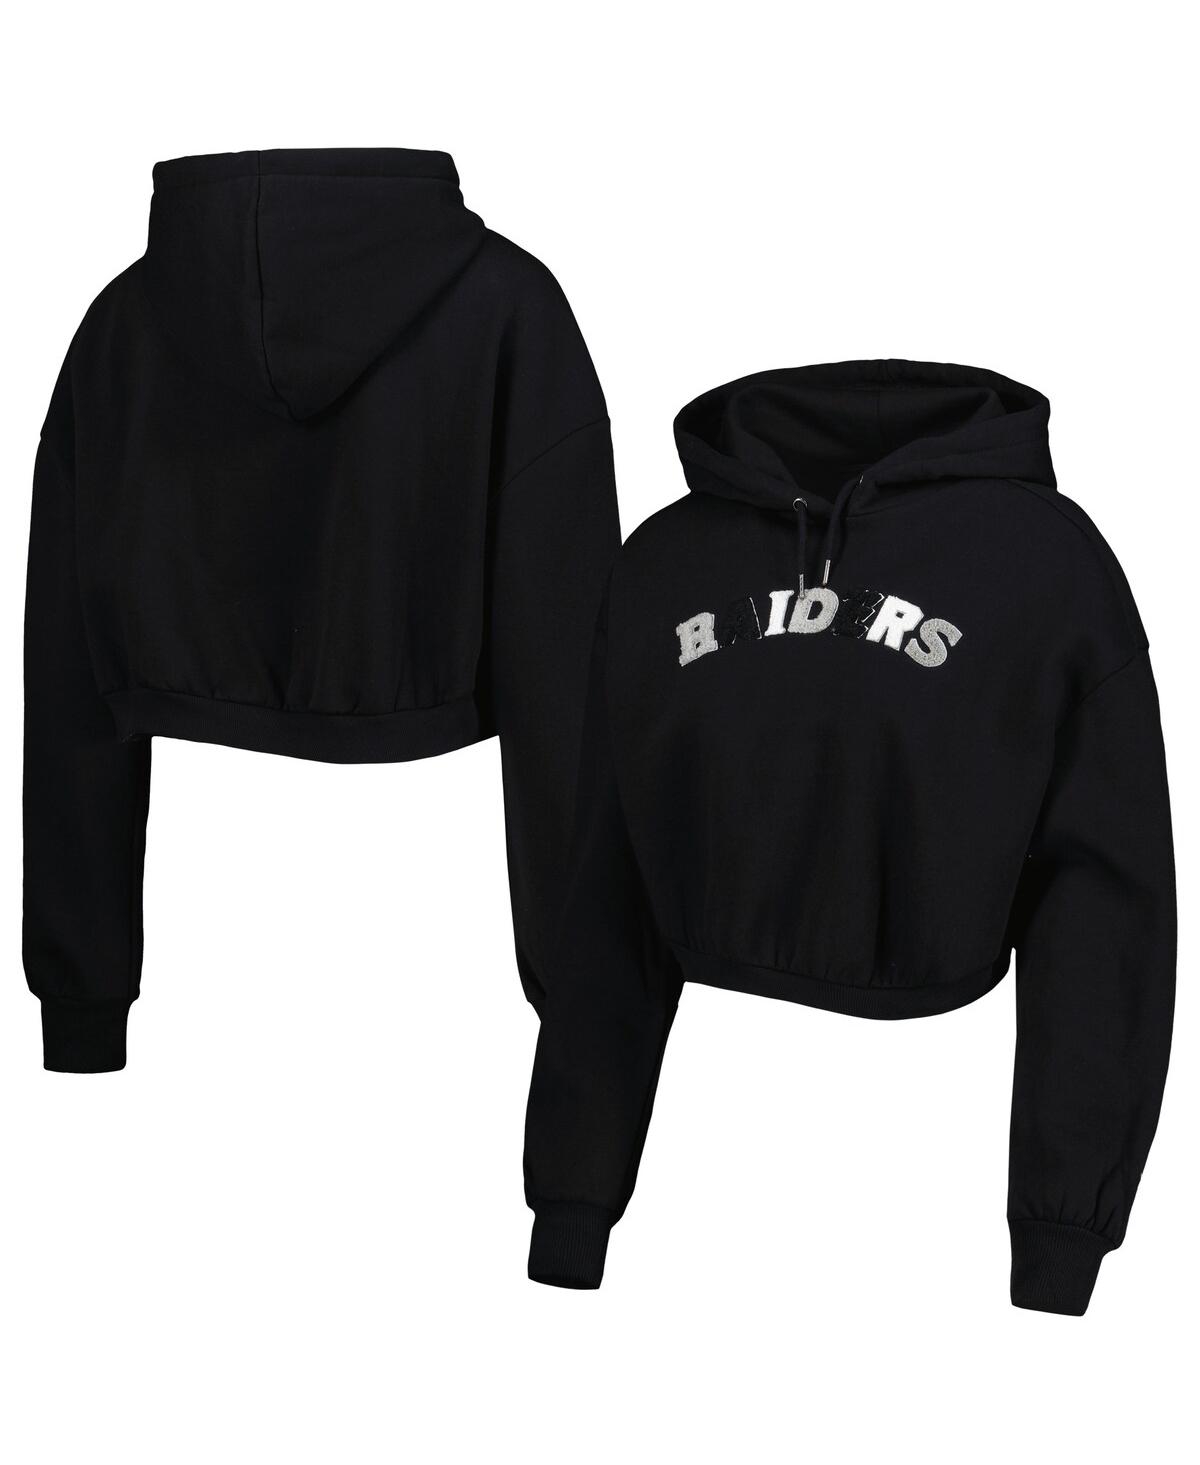 Shop The Wild Collective Women's  Black Las Vegas Raiders Cropped Pullover Hoodie